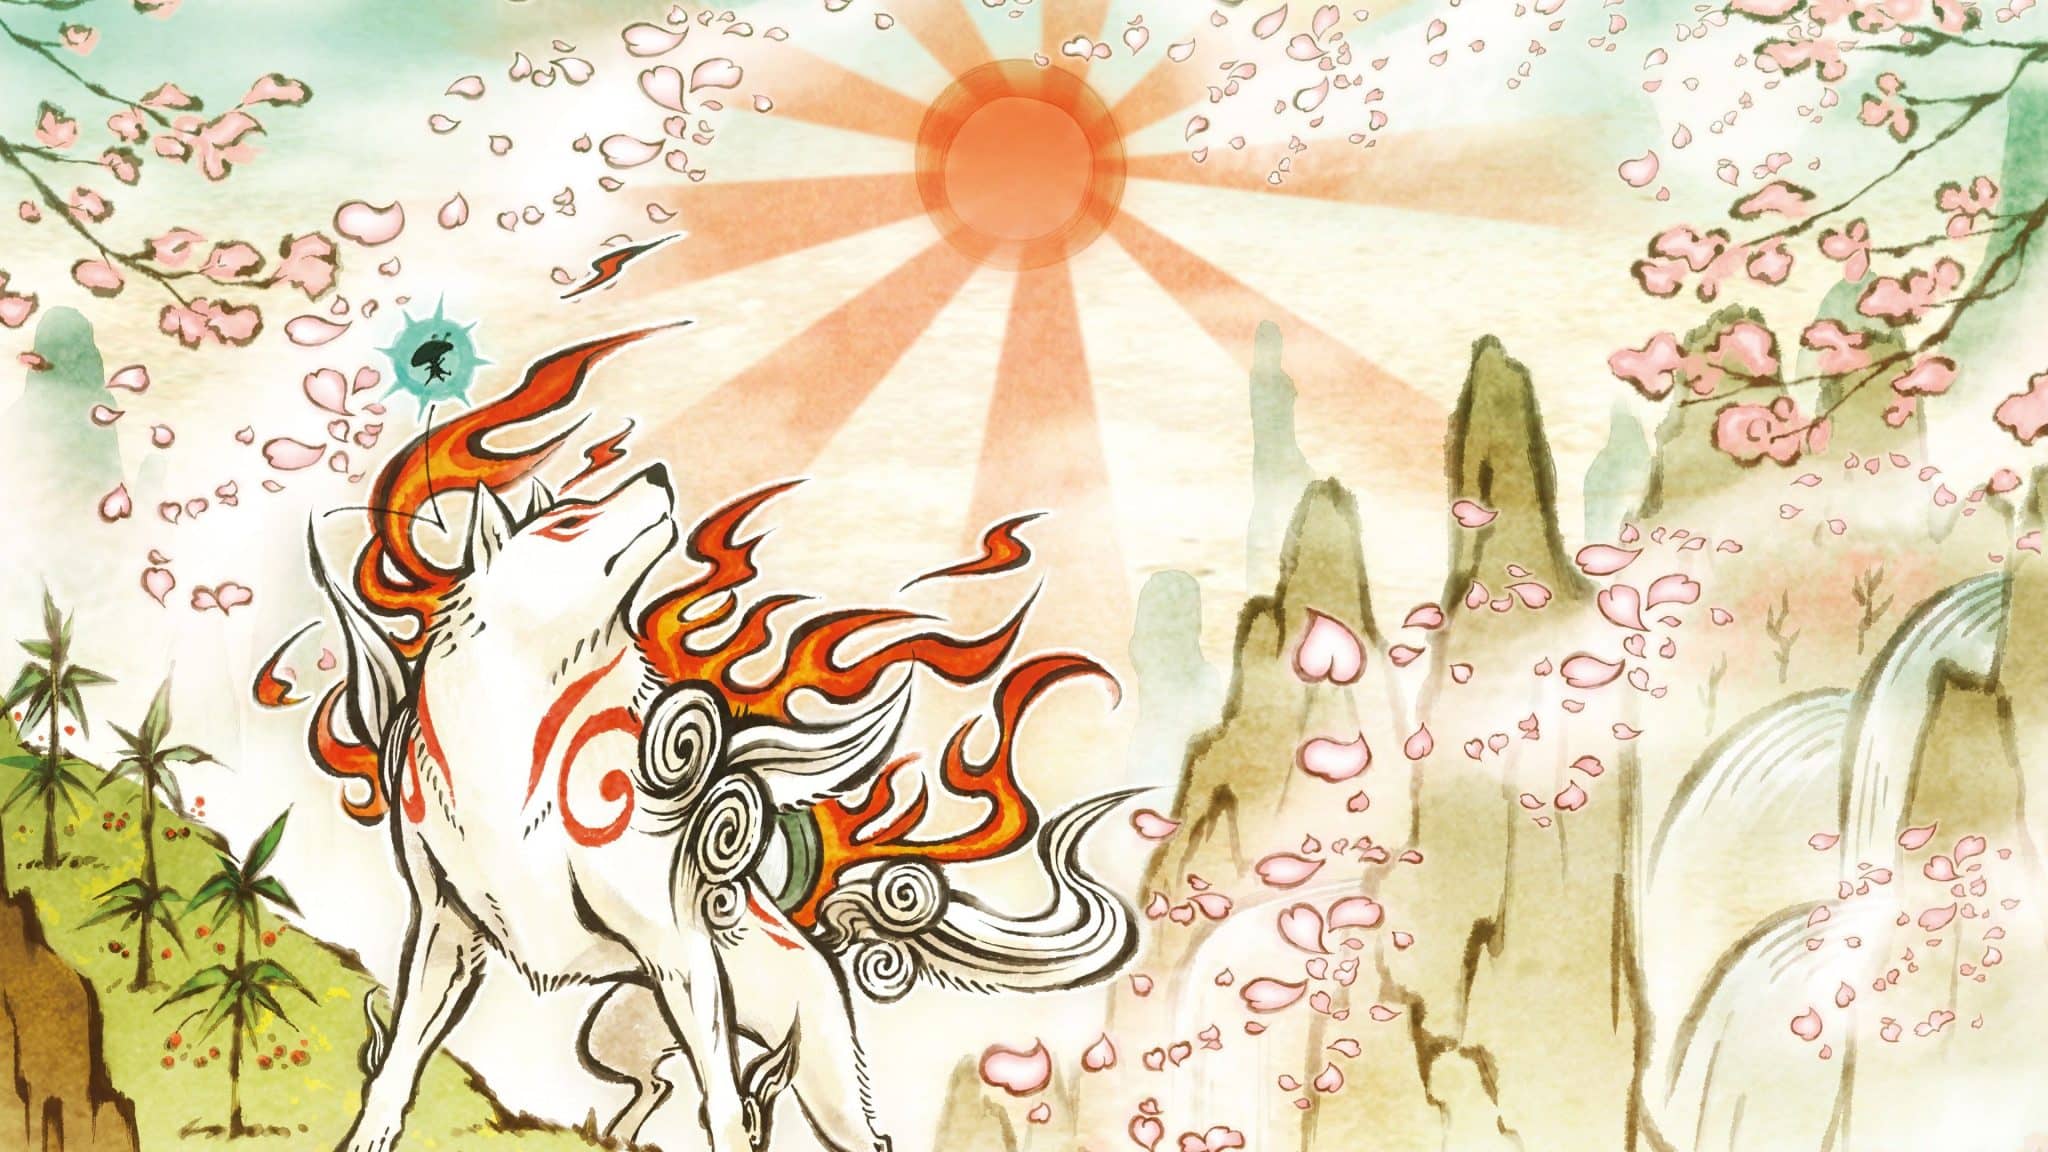 Old But Gold #130 - Okami 6